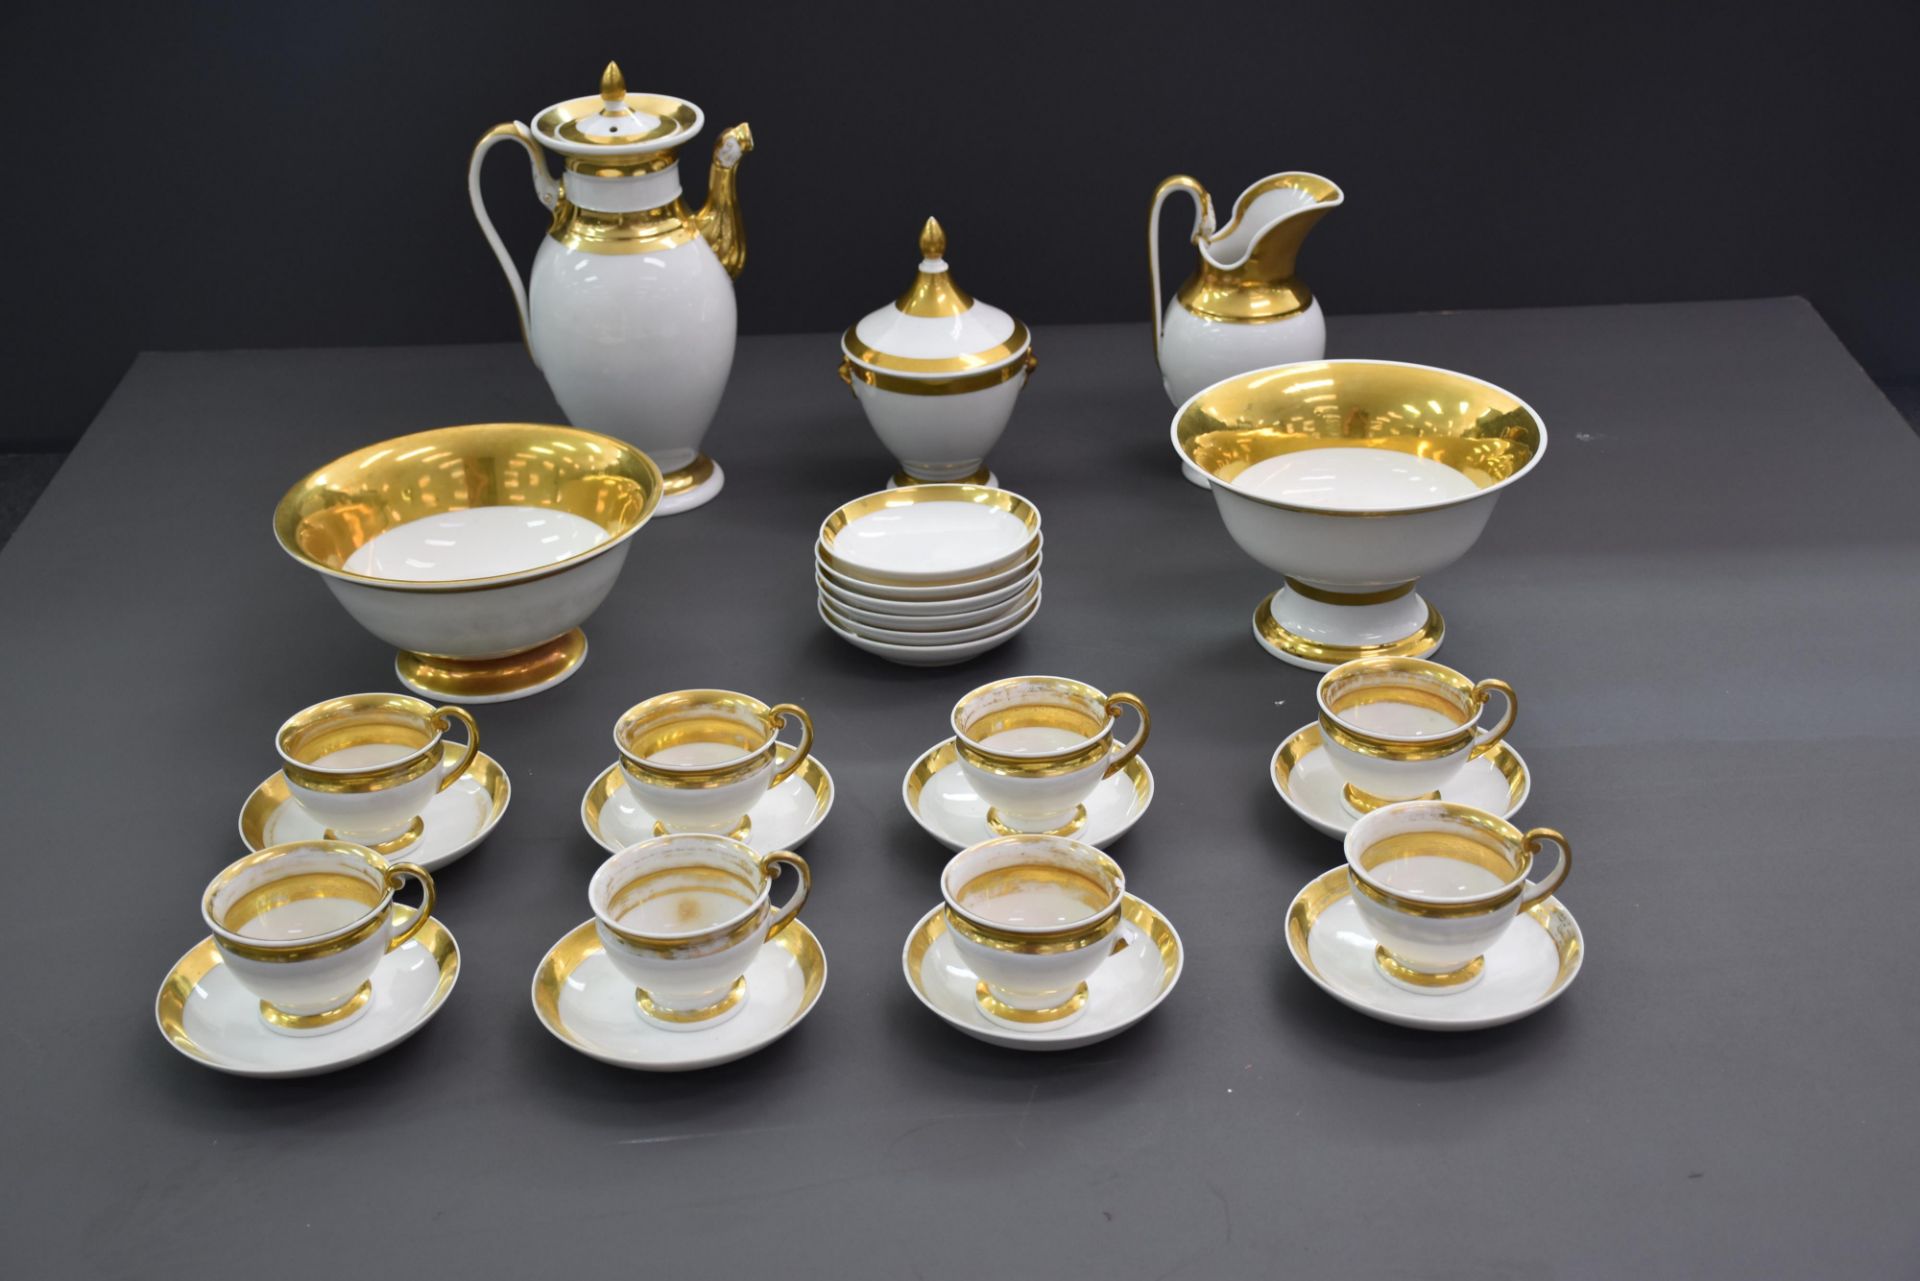 Part of a coffee service in Brussels porcelain with golden edges. Empire style. Composed of a coffee